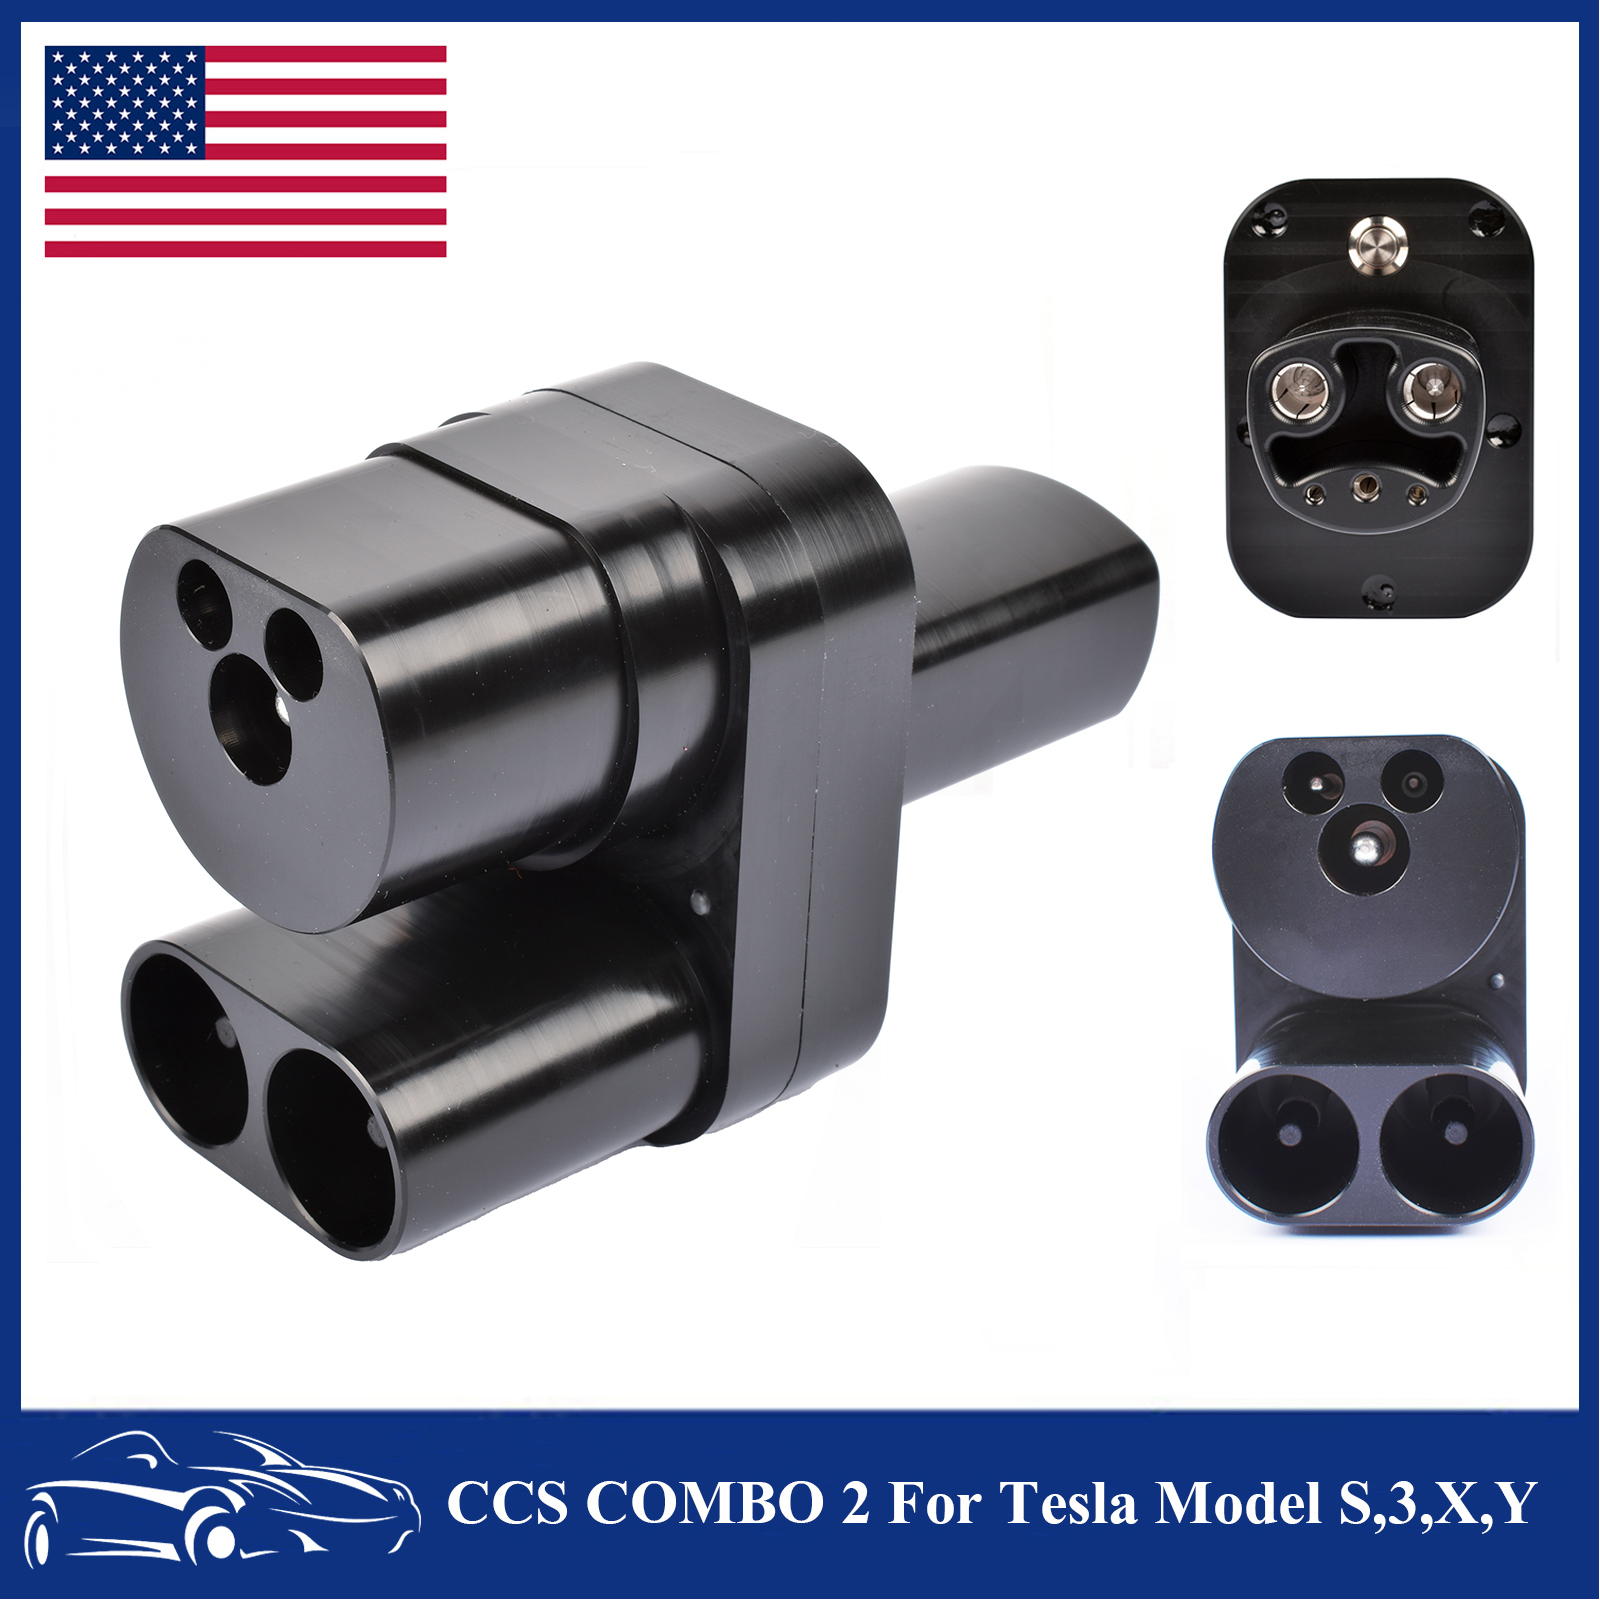 Chargerman CCS Combo 2 to Tesla Adapter For Model S, 3, X & Y - CCS2 A